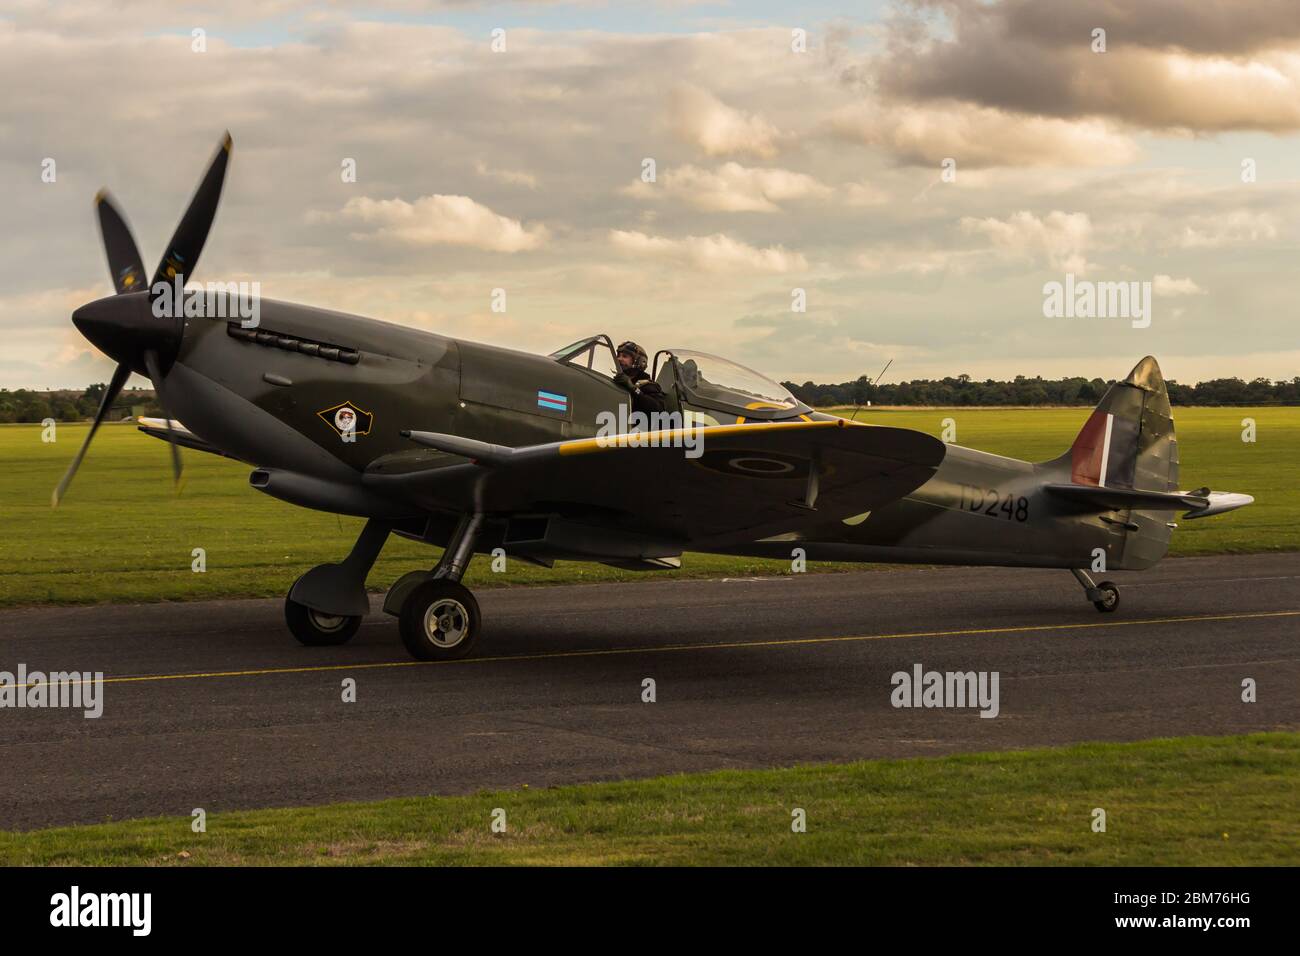 Spitfire at Duxford Imperial war Museum airfield Stock Photo